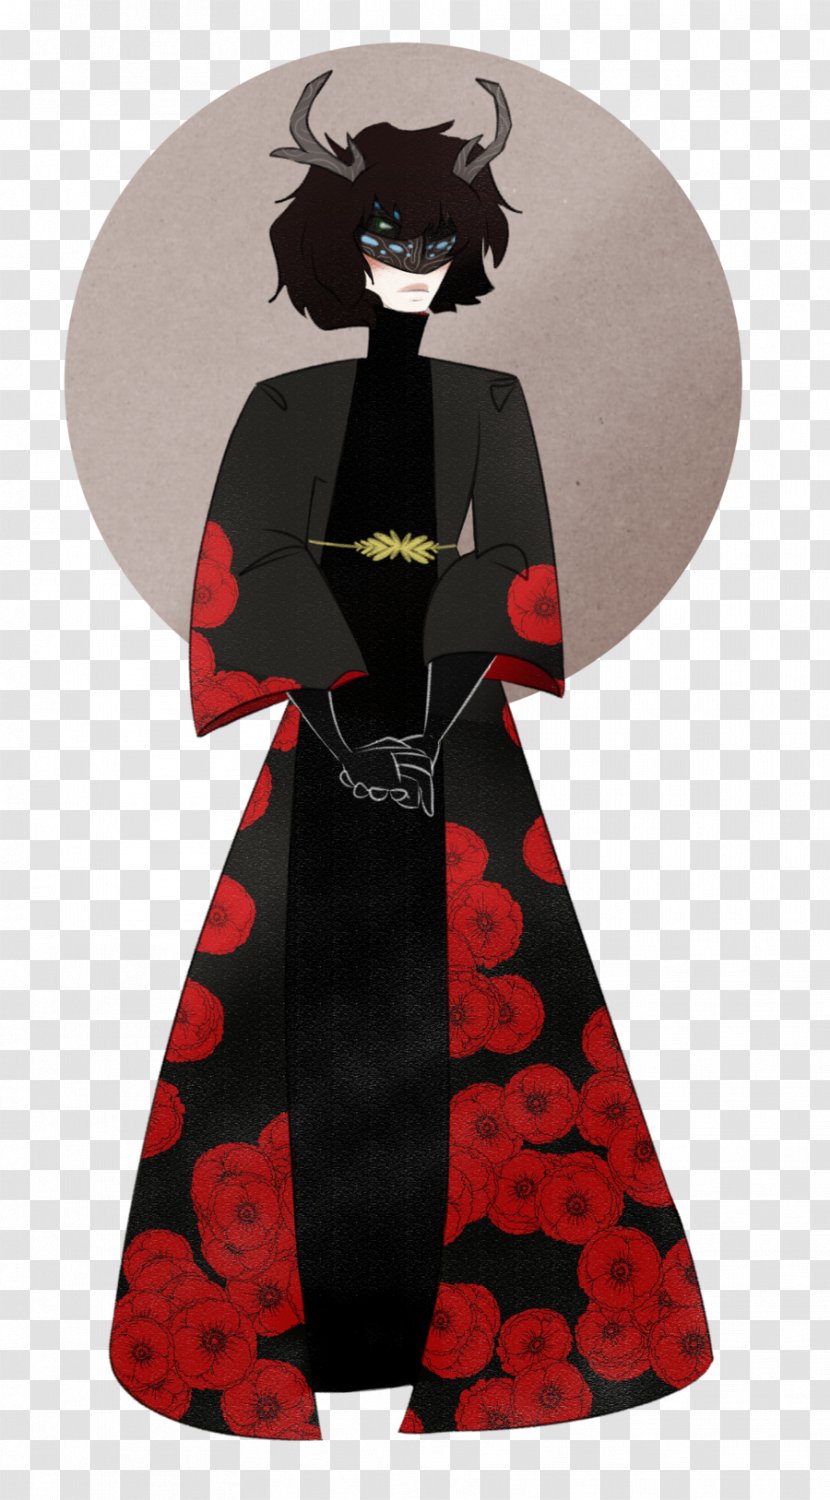 Costume Design Outerwear Character - Fictional - She Mask Transparent PNG